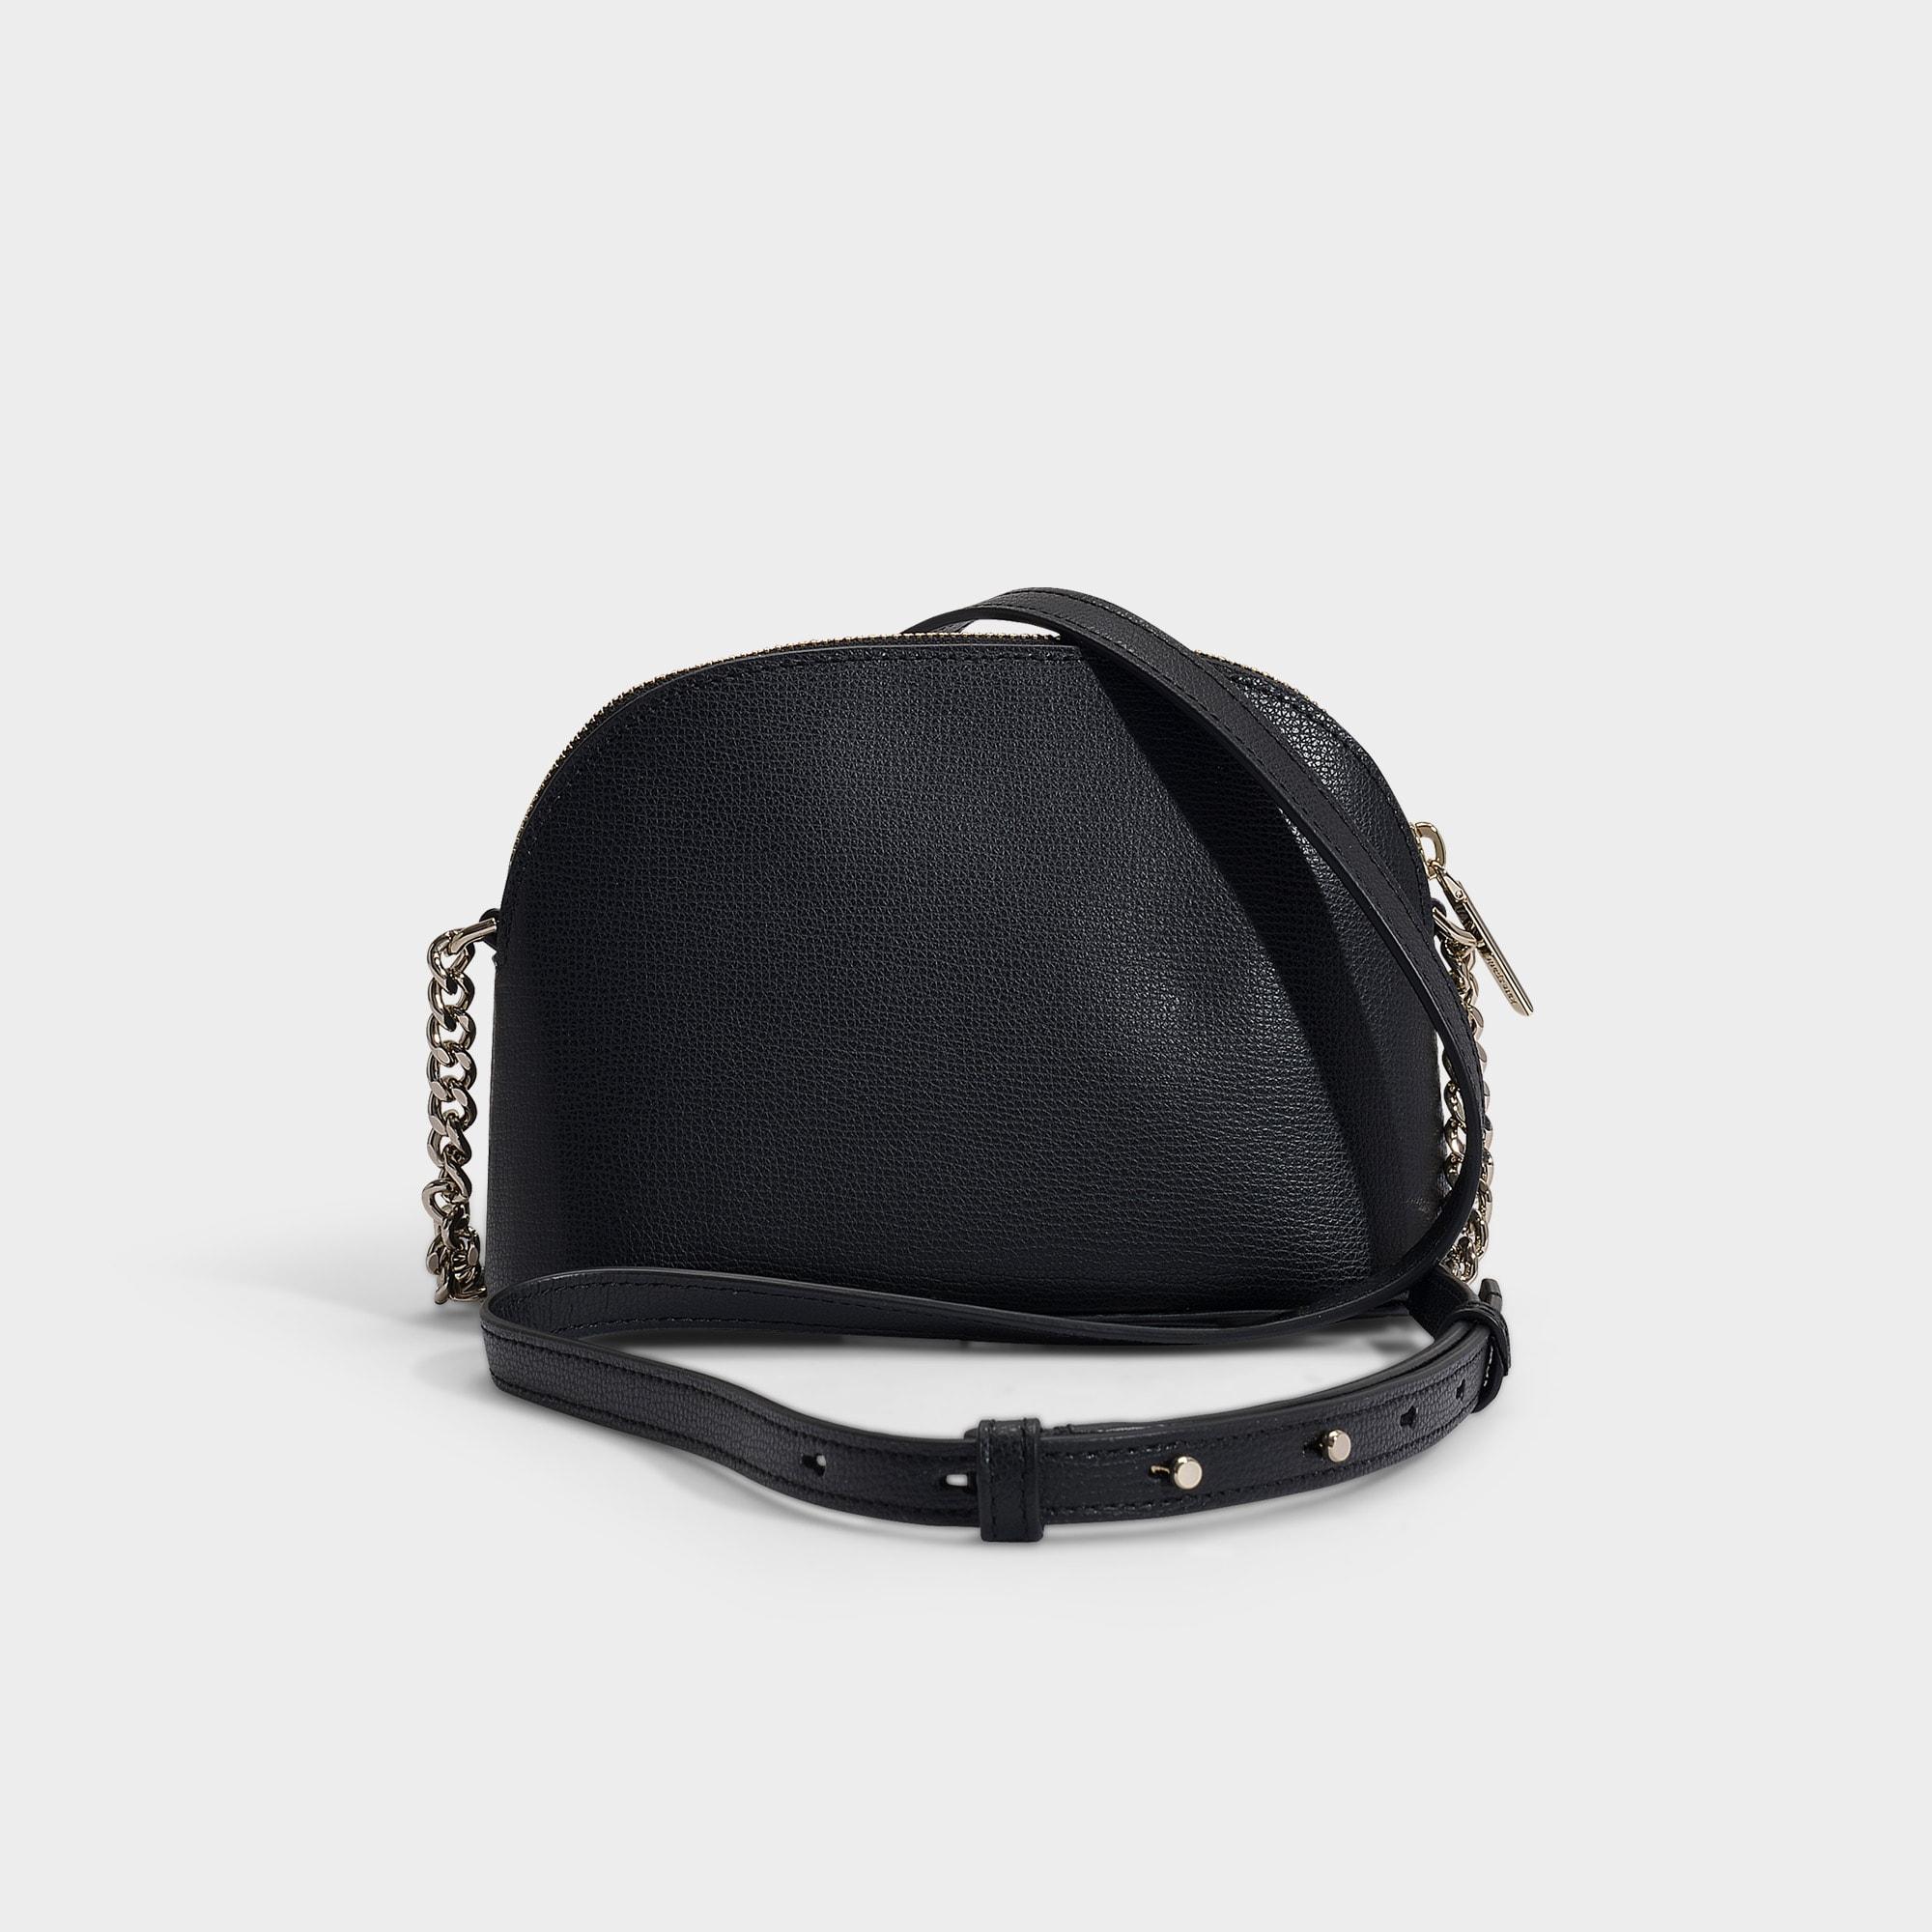 Kate Spade Sylvia Small Dome Crossbody Bag In Black Leather in Black - Lyst